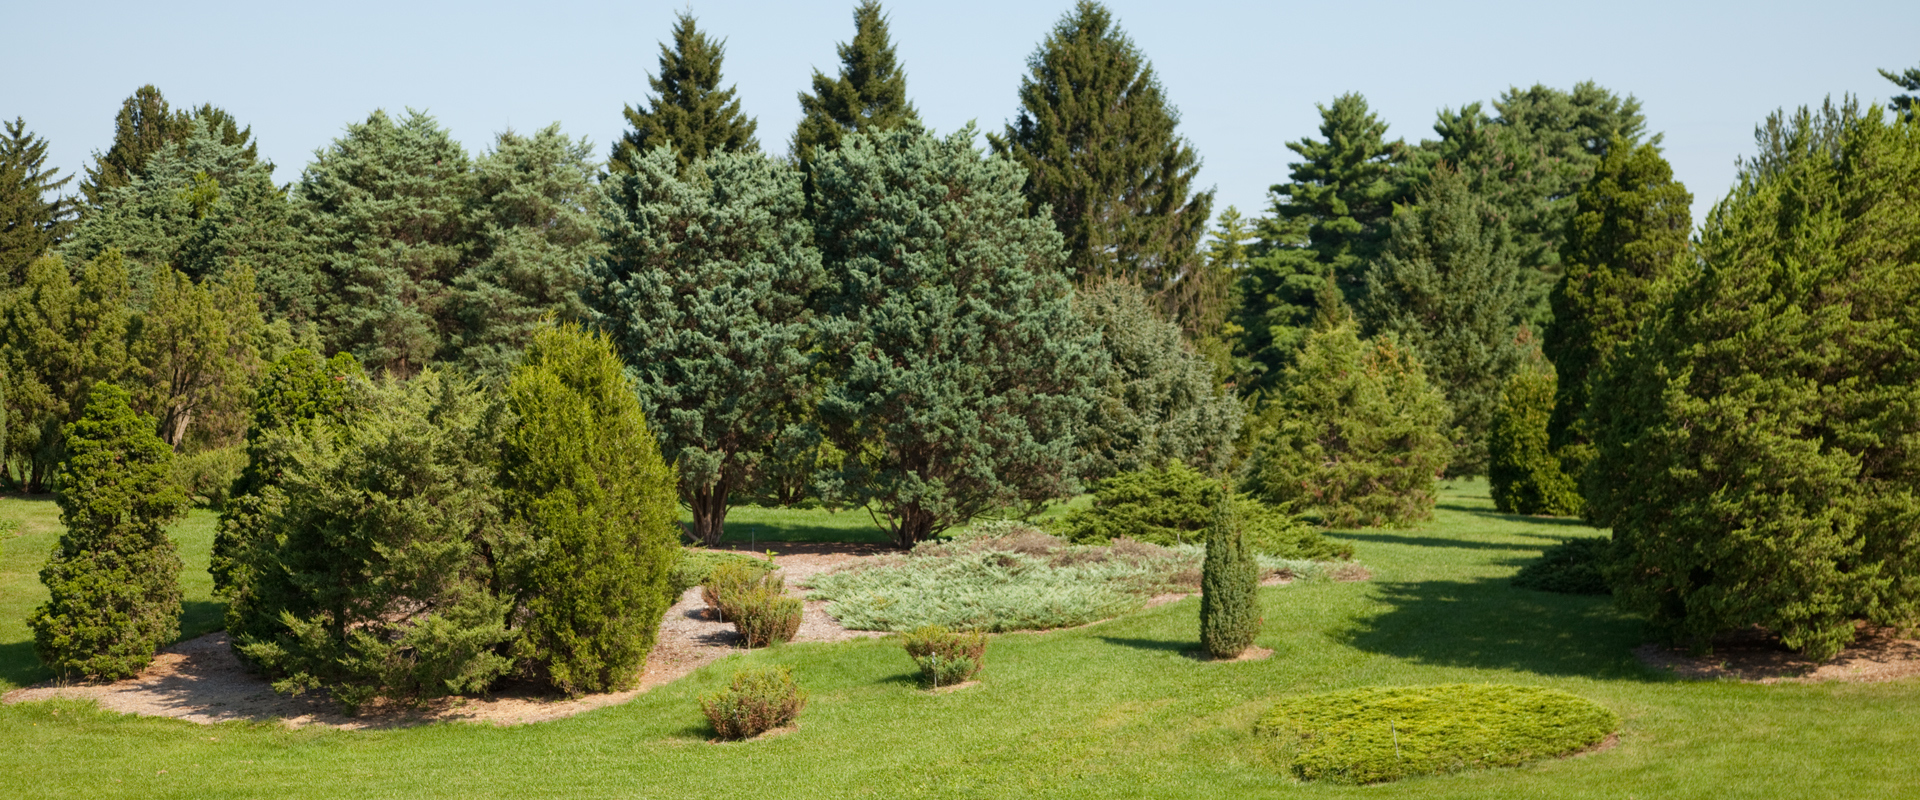 Conifer collection in summer